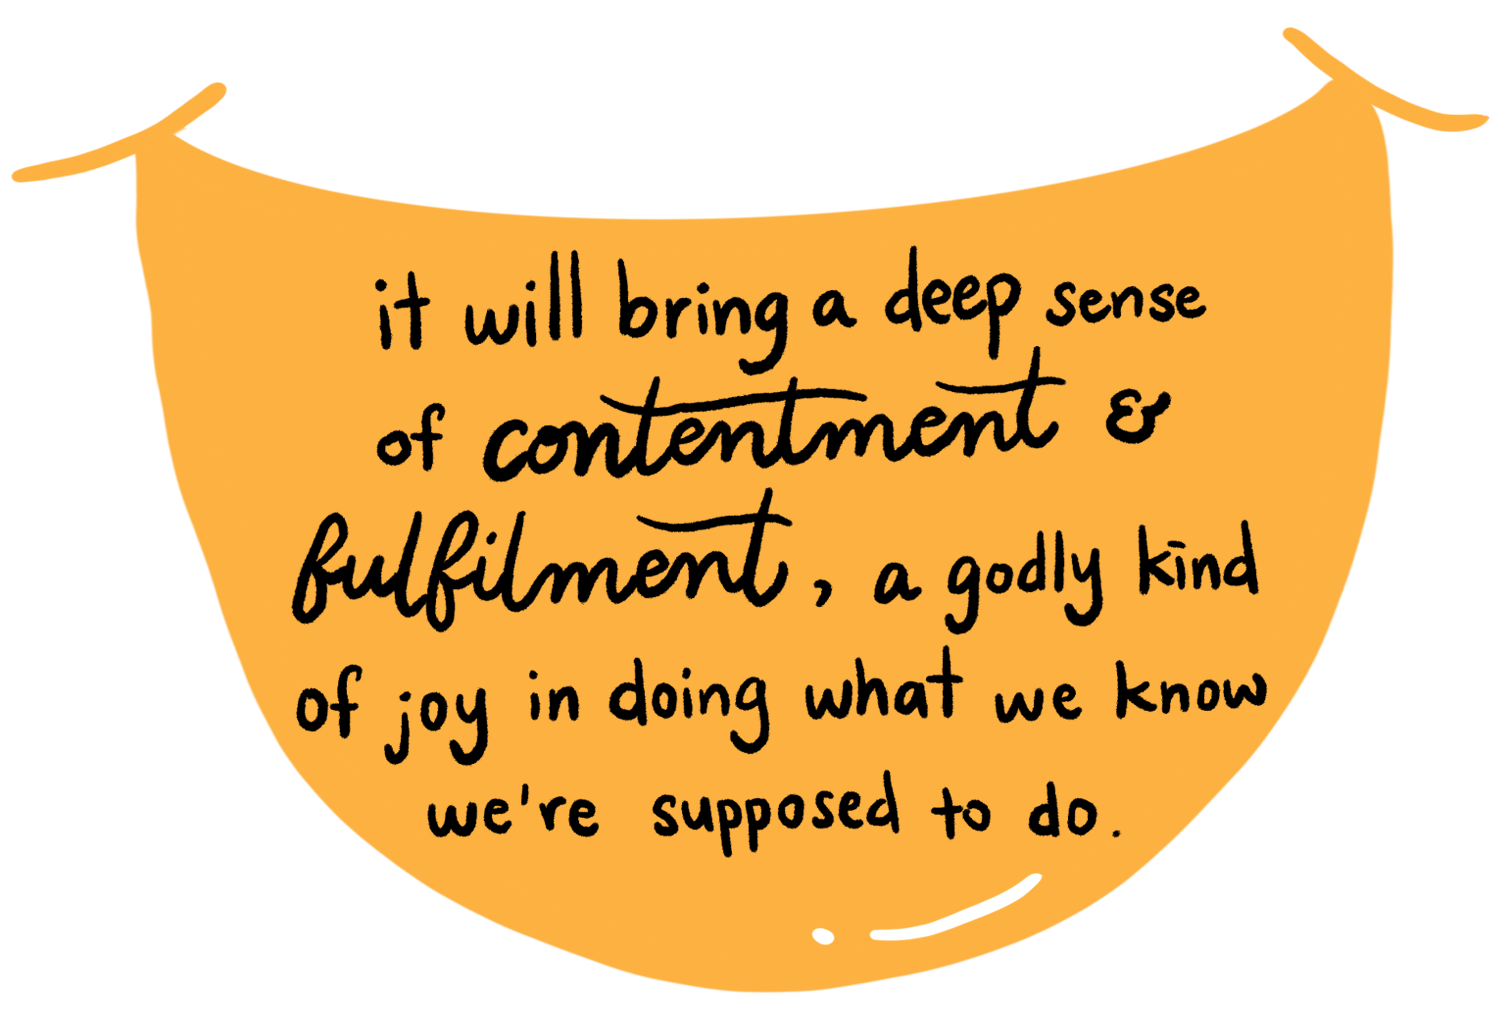 it will bring a deep sense of contentment and fulfilment, a godly kind of joy in doing what we know we’re supposed to do.